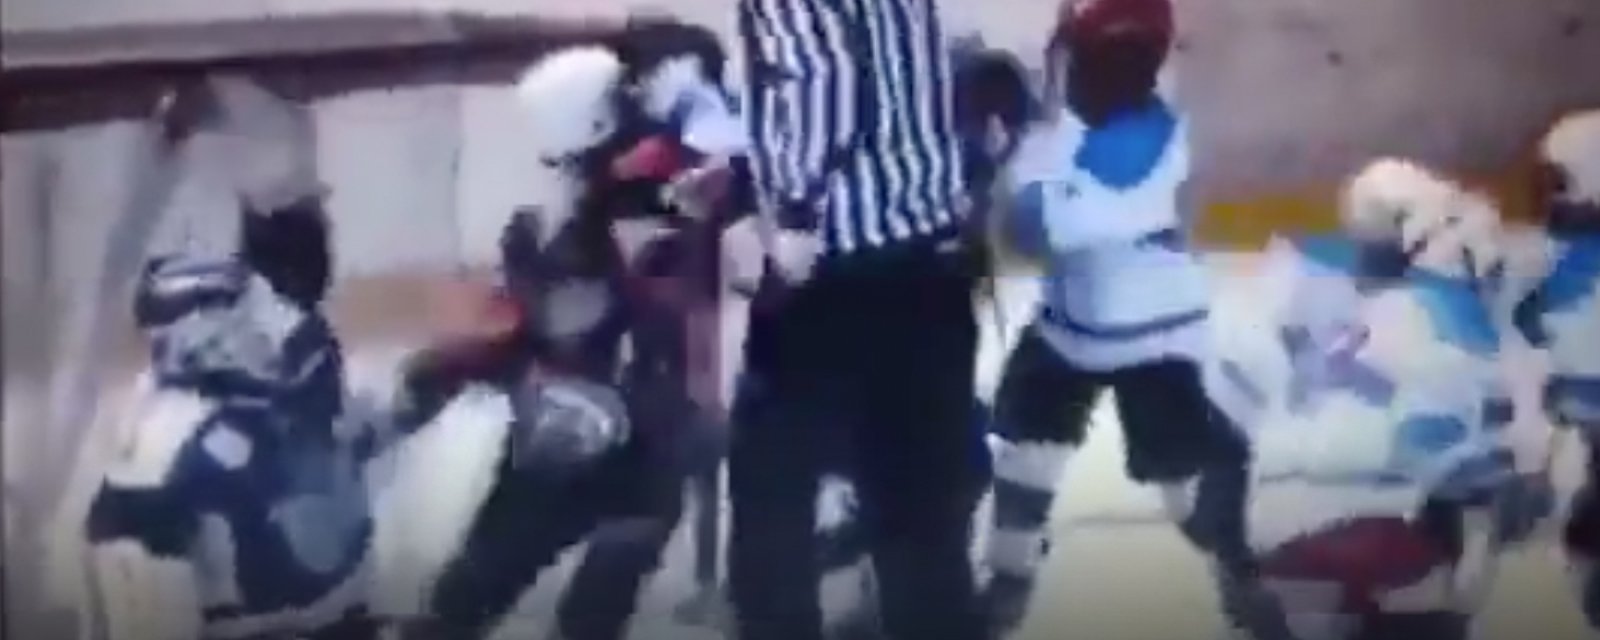 Massive line brawl erupts, refs can't do anything to stop it, goalie just dances as it happens